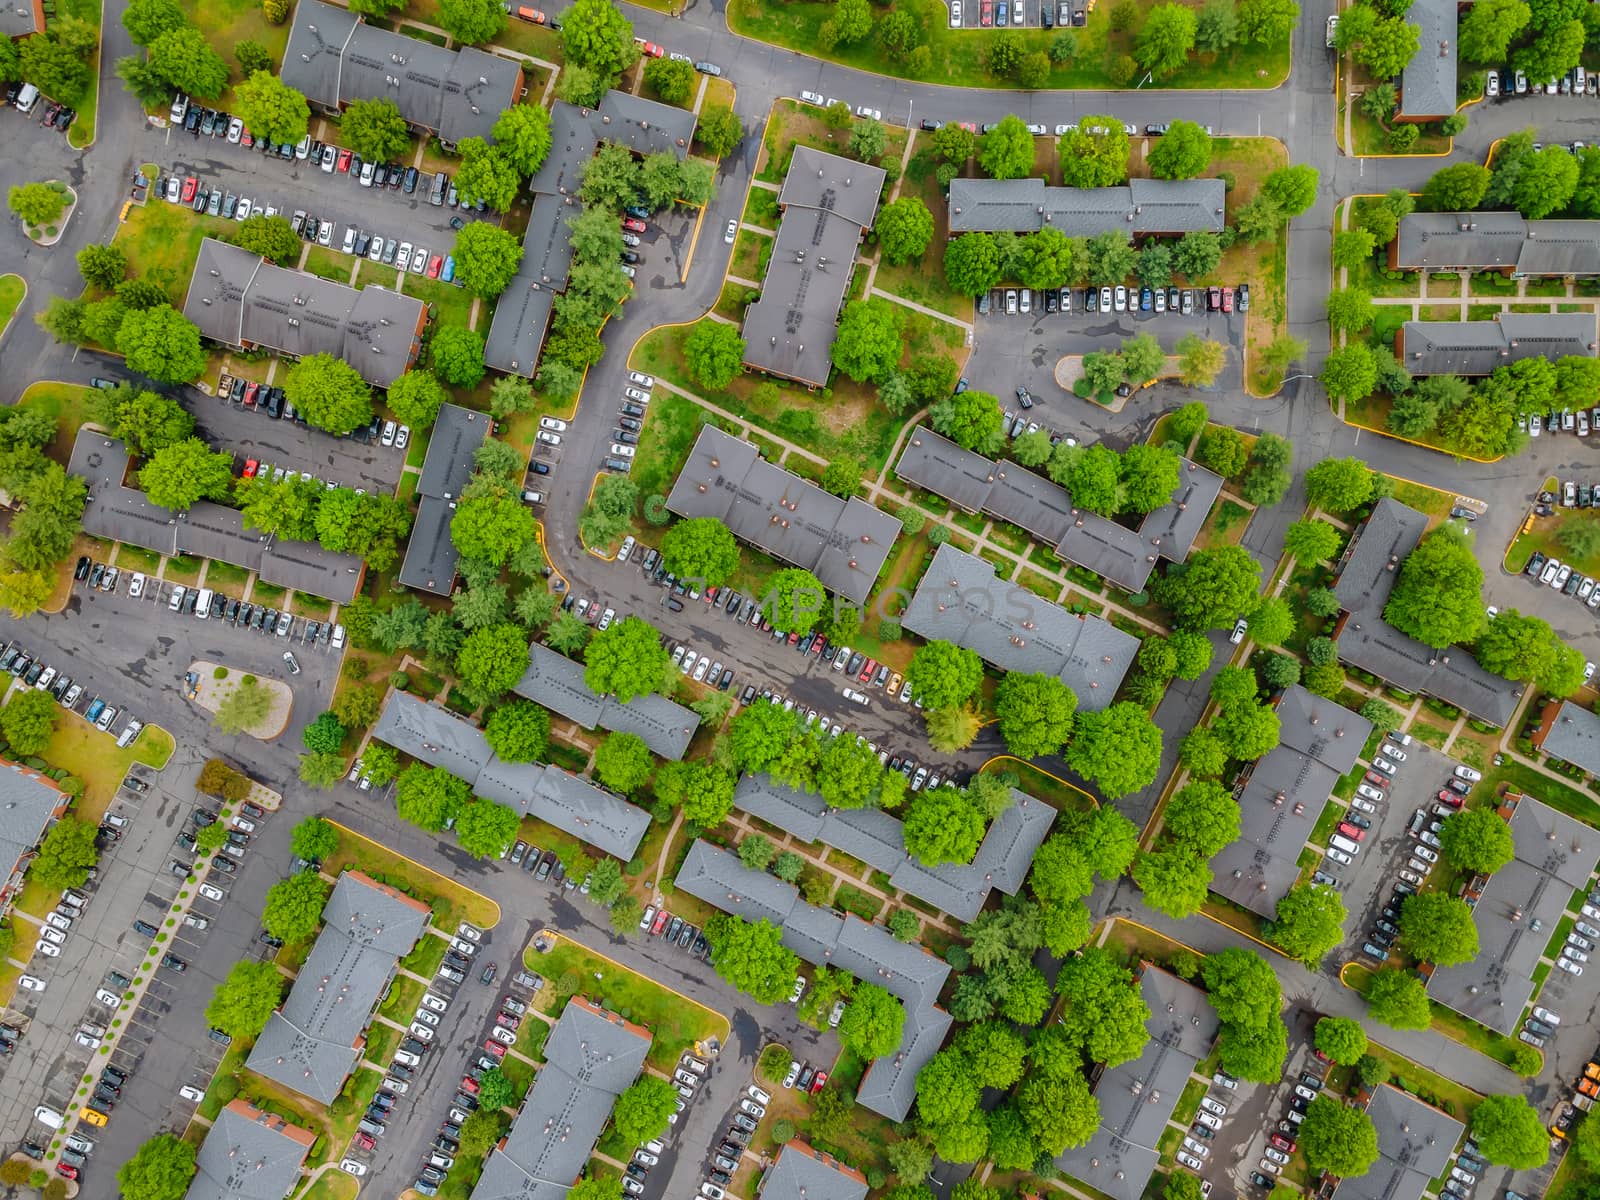 Cars parking in asphalt busy parking lot with stay home during the Covid 19 coronavirus pandemic aerial view of residential district with apartment